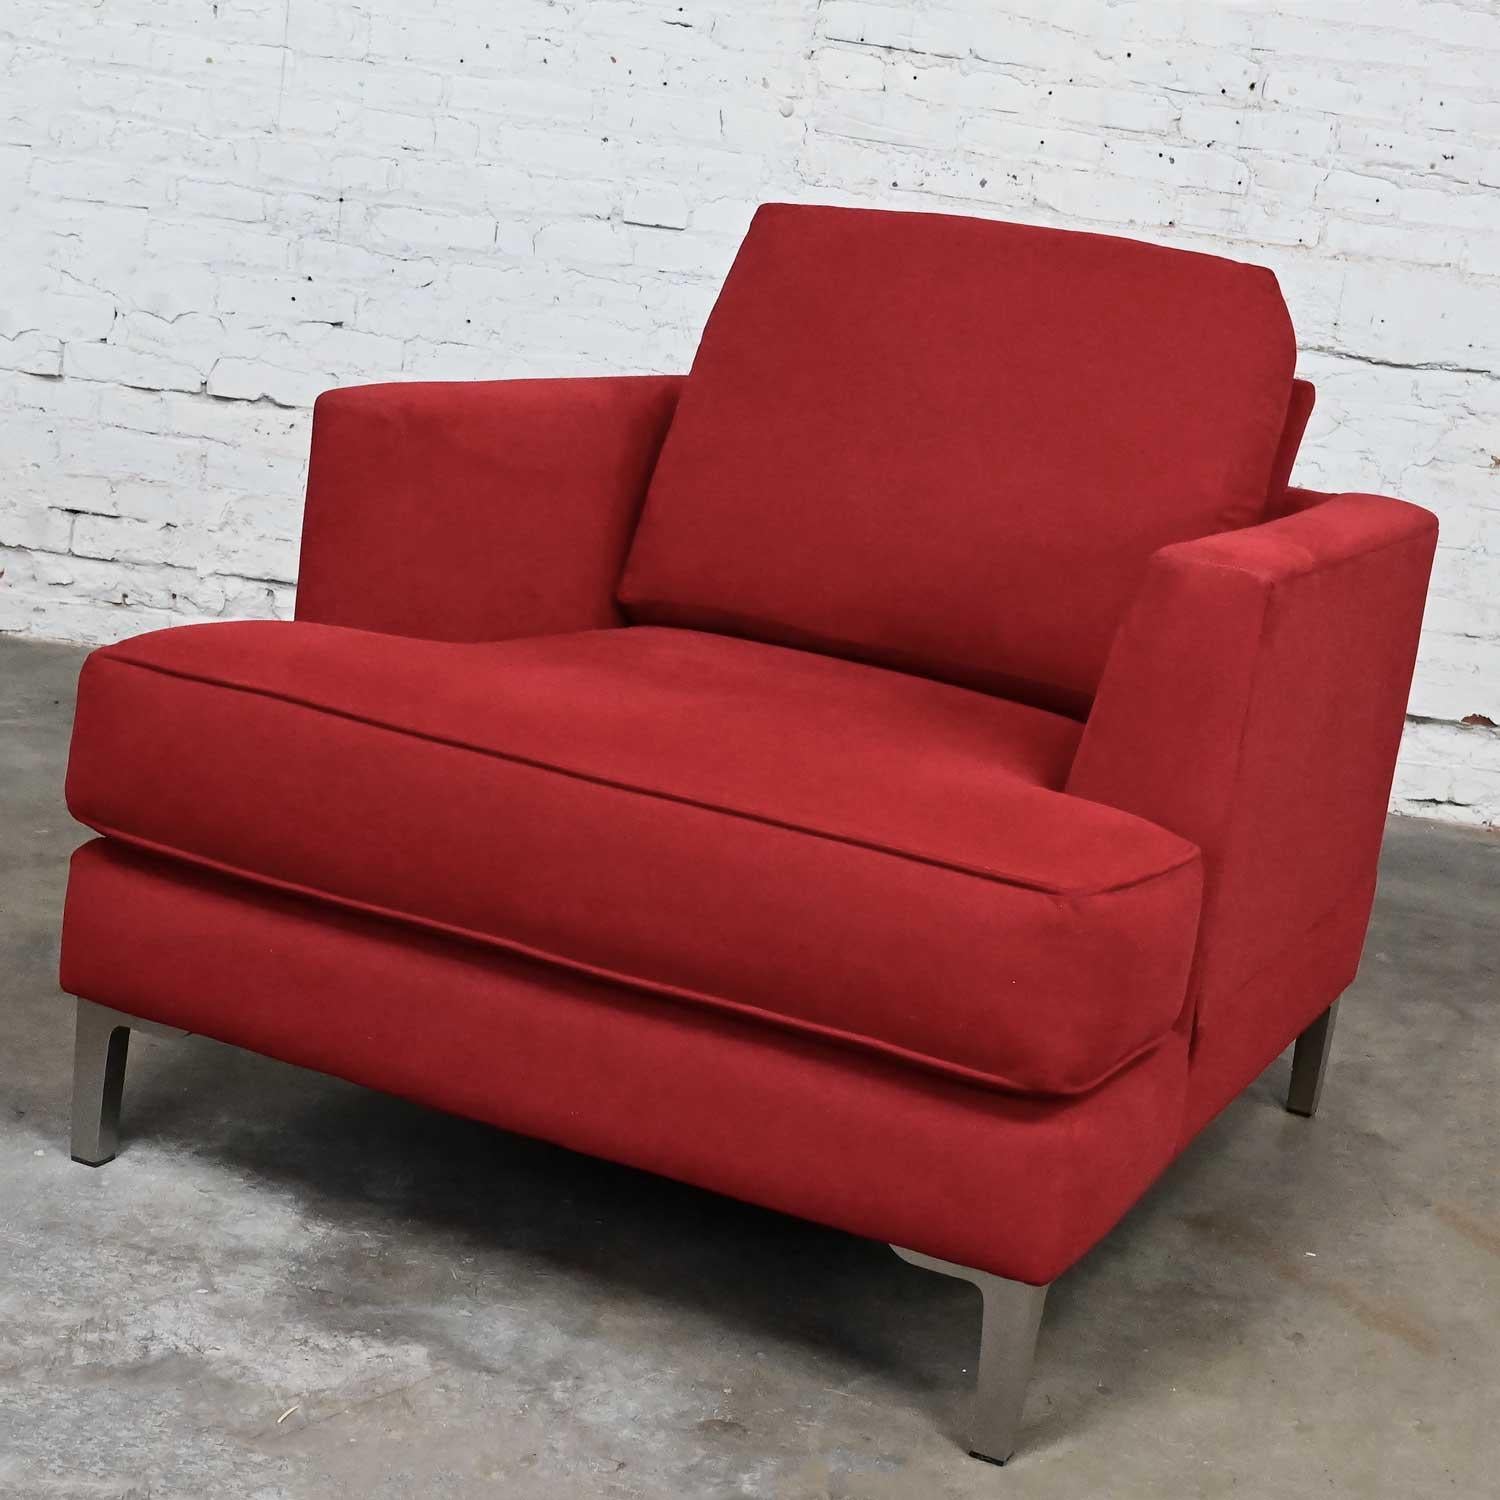 Modern Carter Club Chair Attr Zen Collection Bright Red with Polished Steel Legs 7